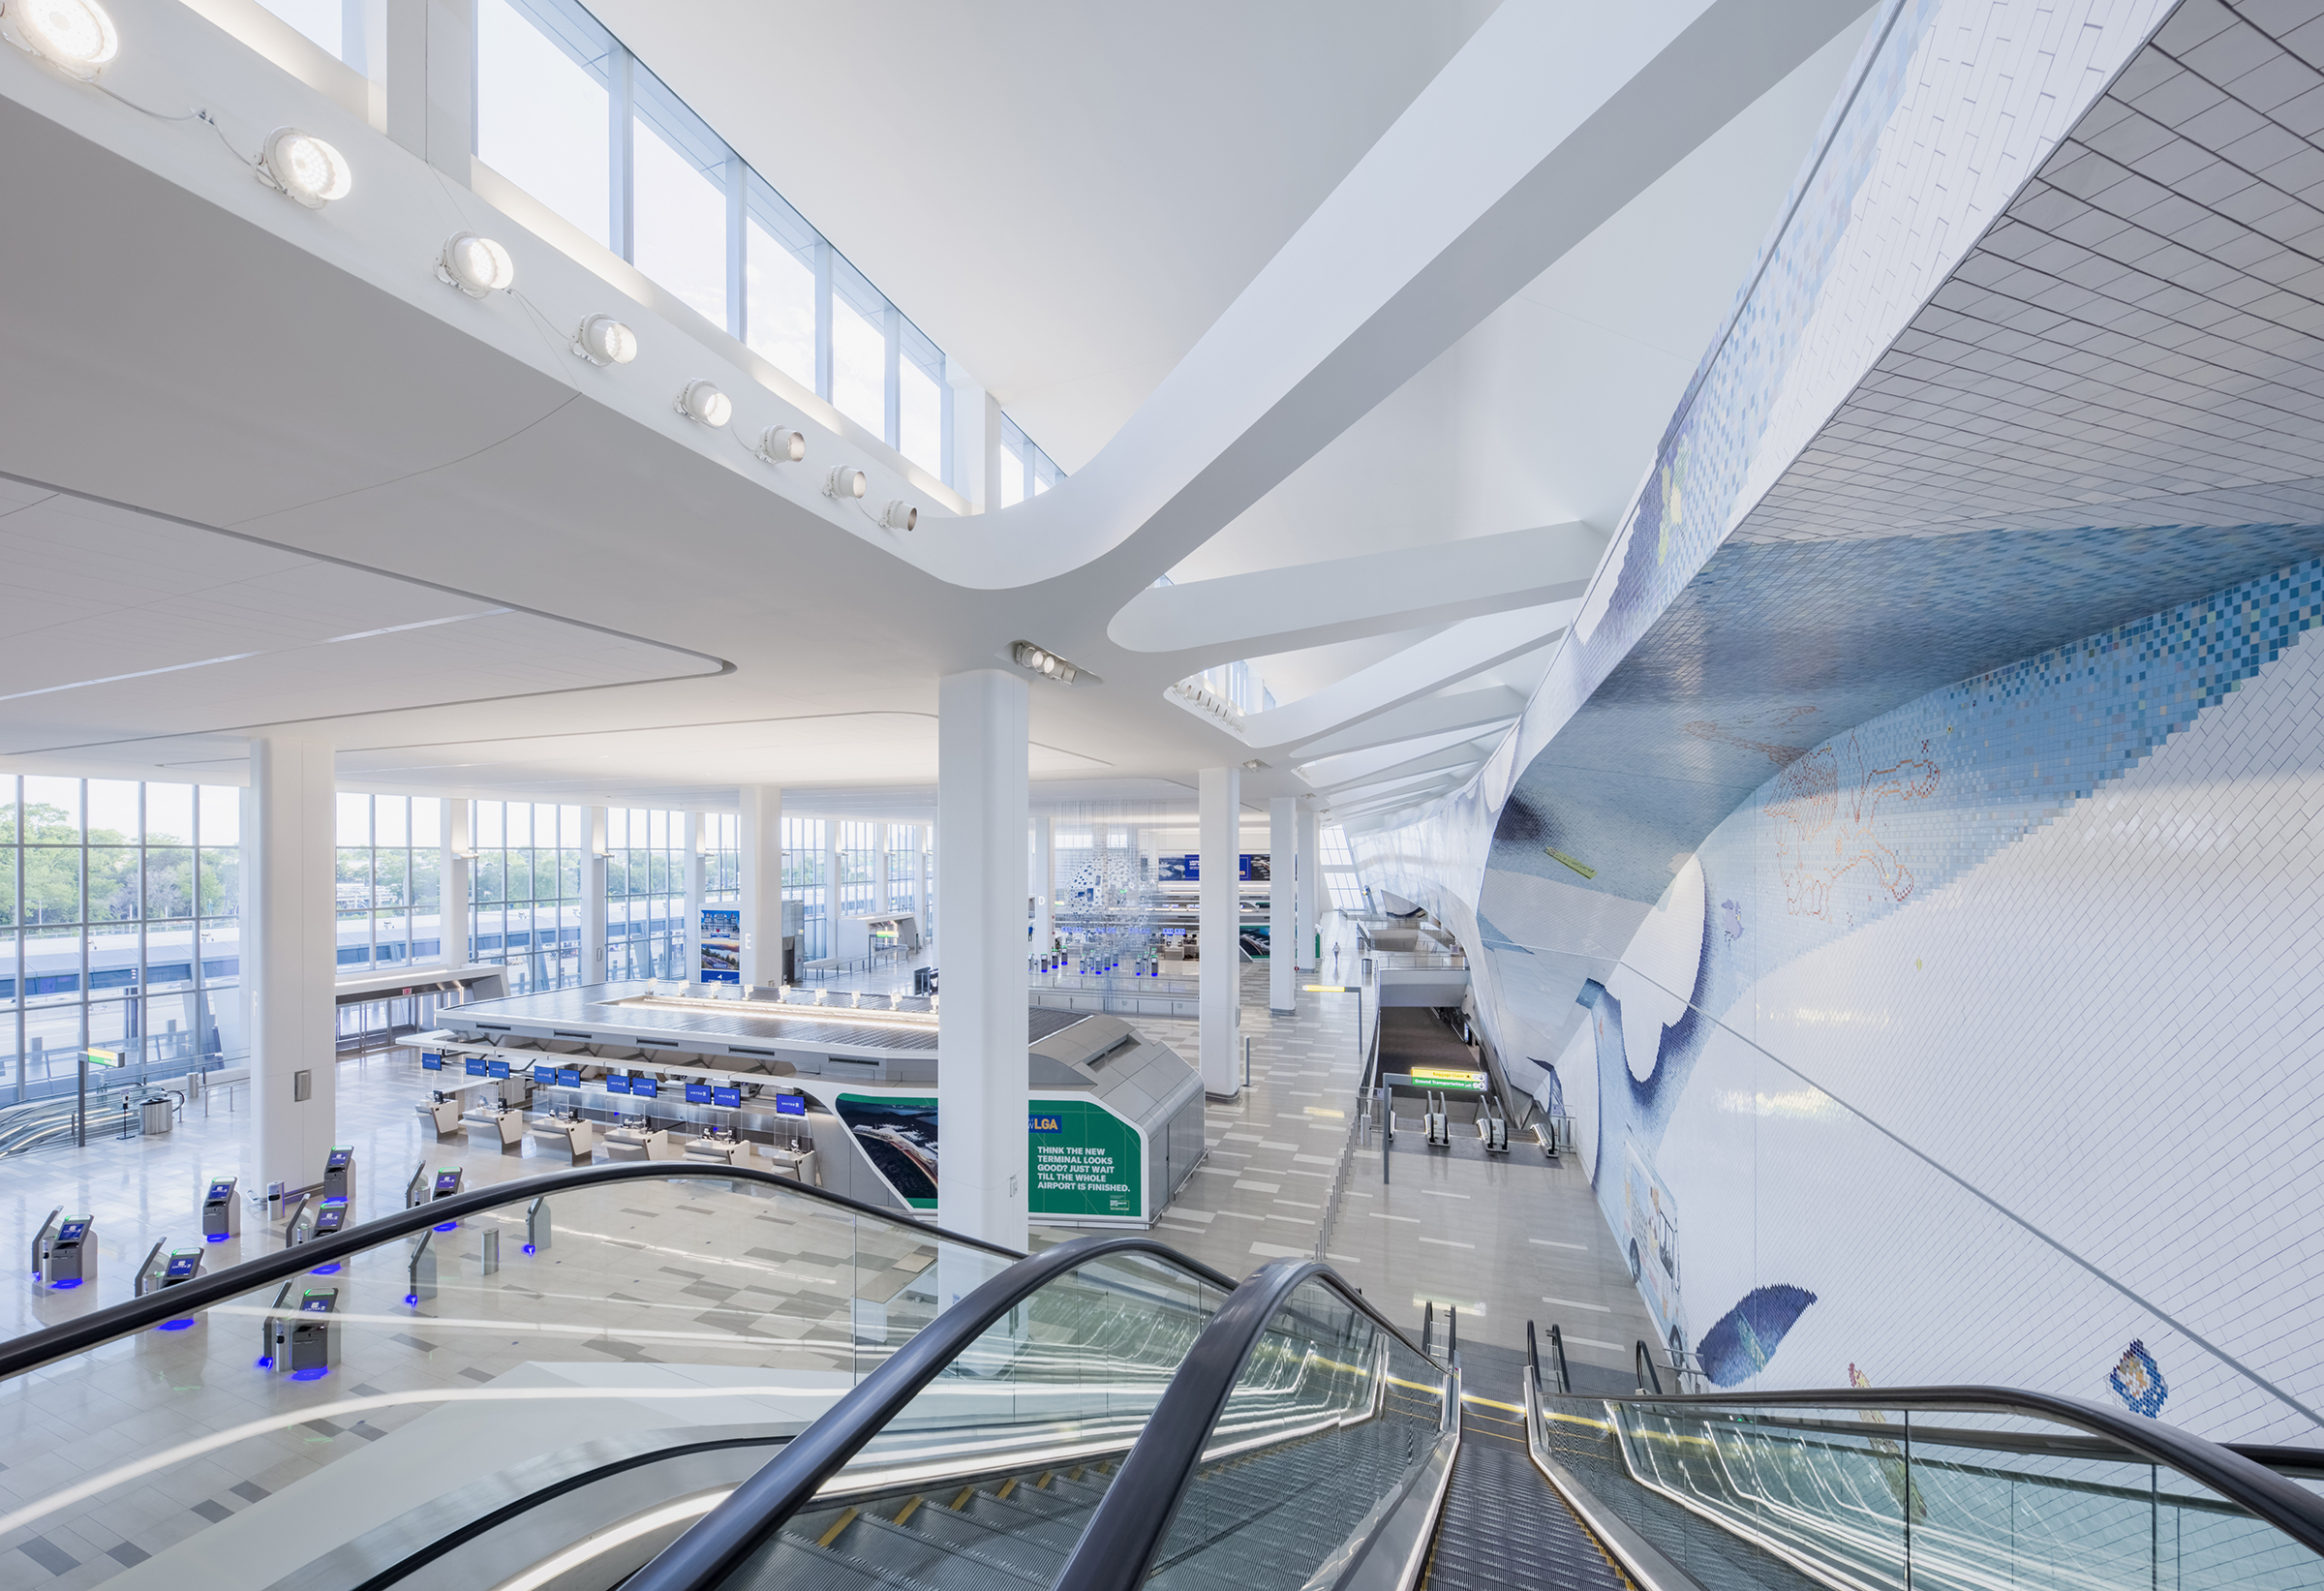 Architecture firm HOK redesigned New York City’s LaGuardia Terminal B, which opened to the public in 2022. (Courtesy HOK)